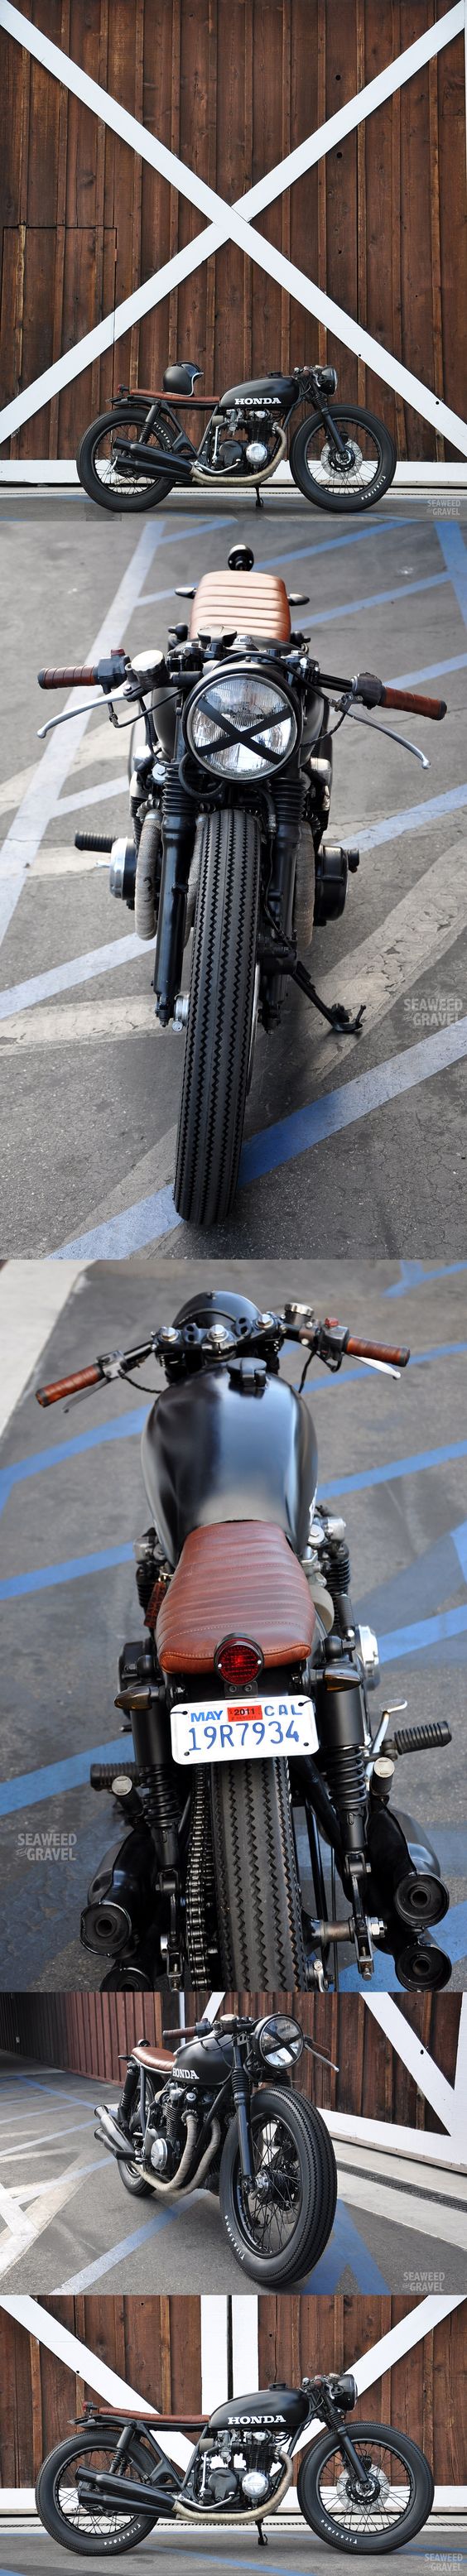 CB550 custom build by Brady Young, love this bike but the 